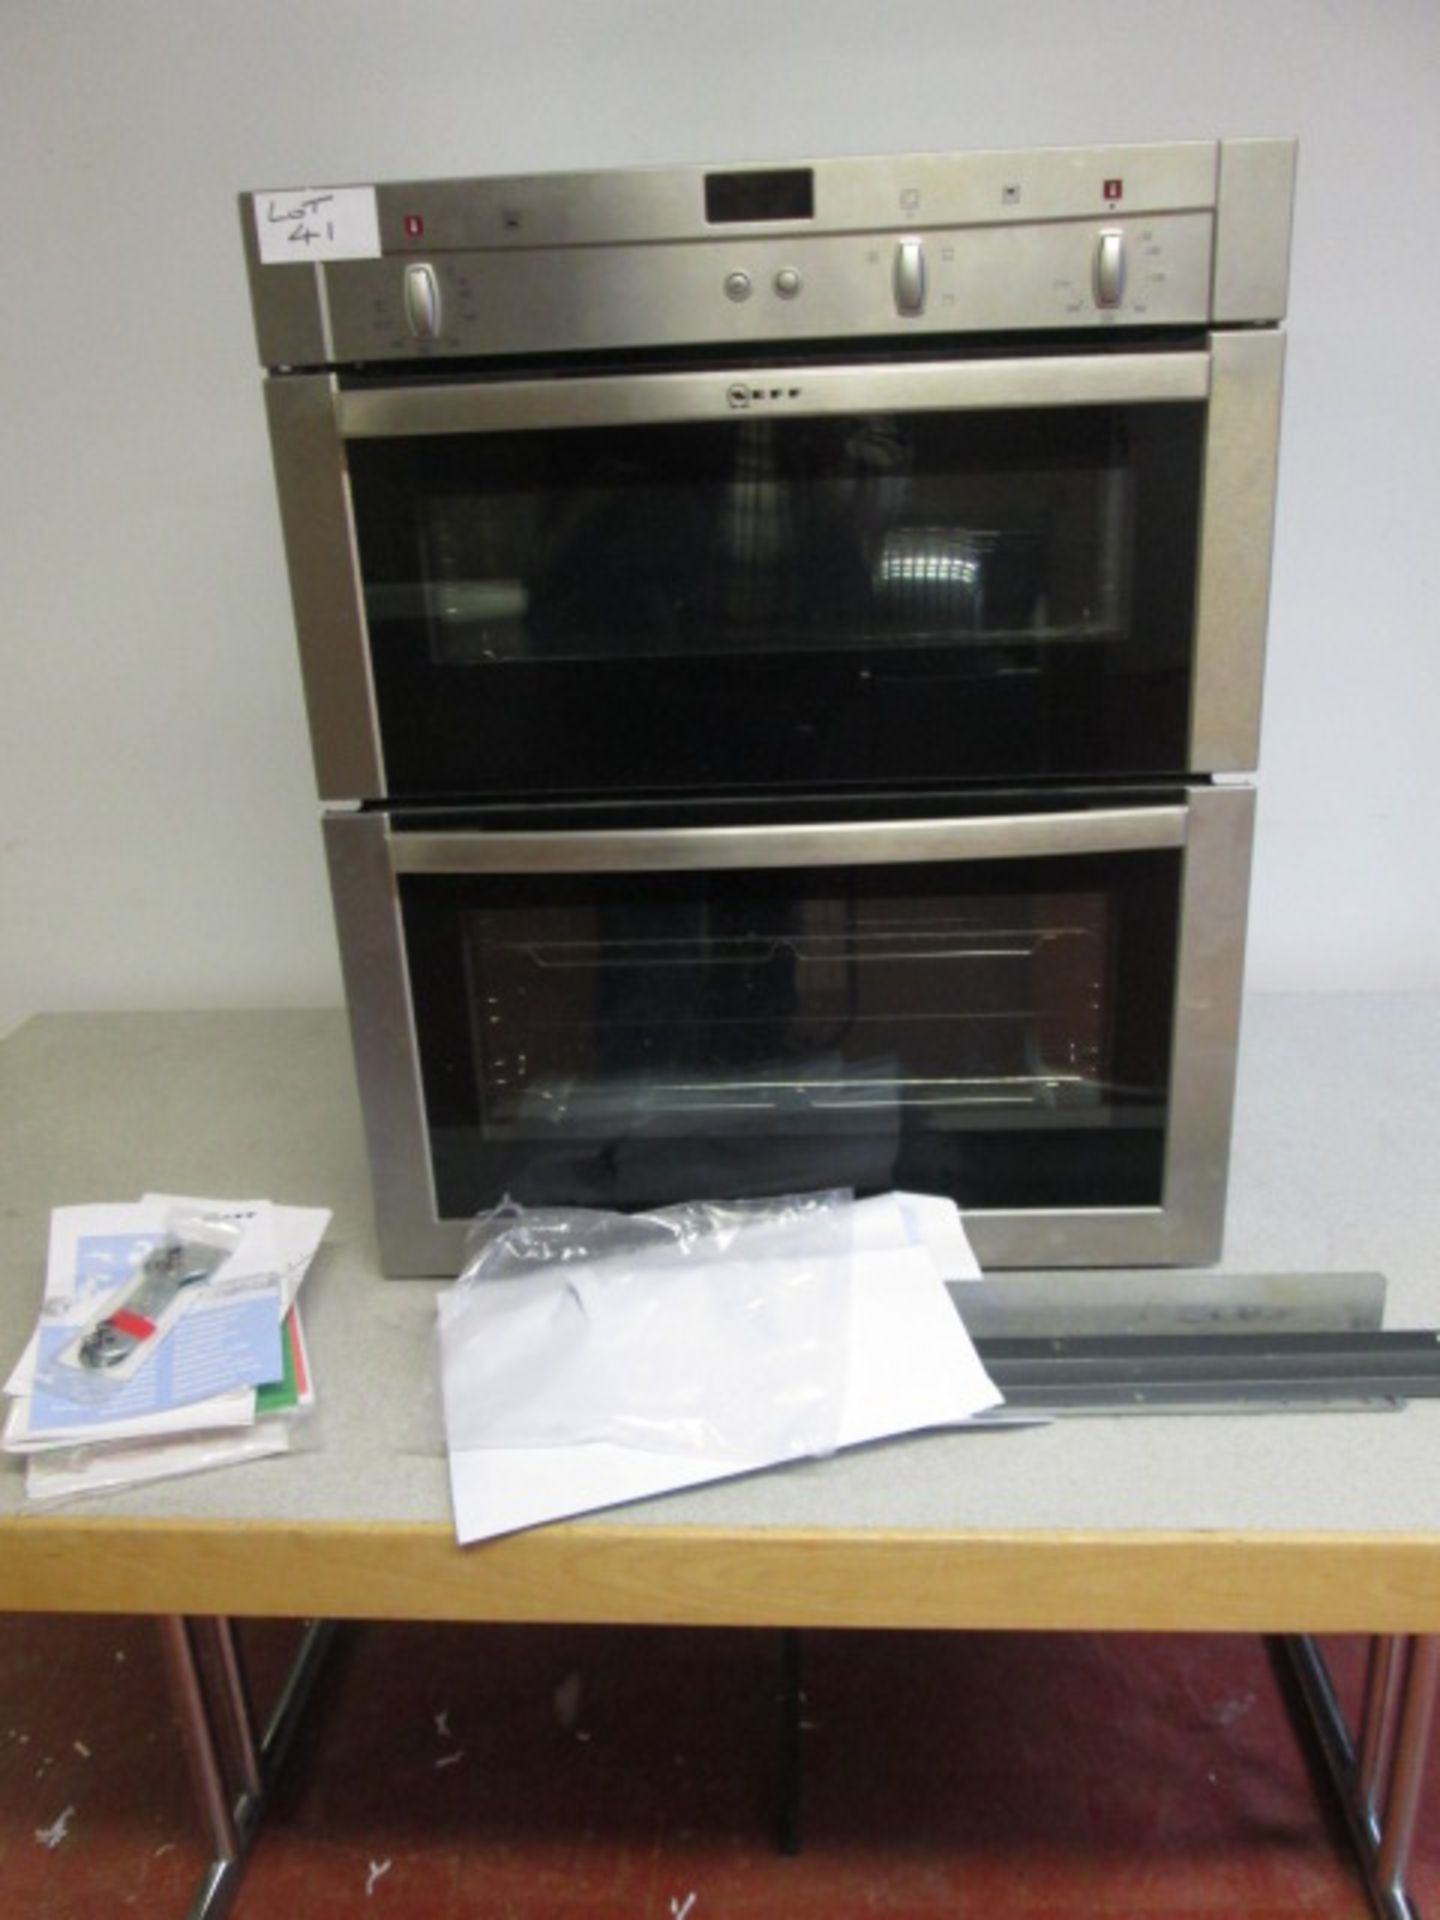 Neff HBB-DP71-7 double Oven & Grill in Brushed Steel (As New/Ex Display), with Manuals